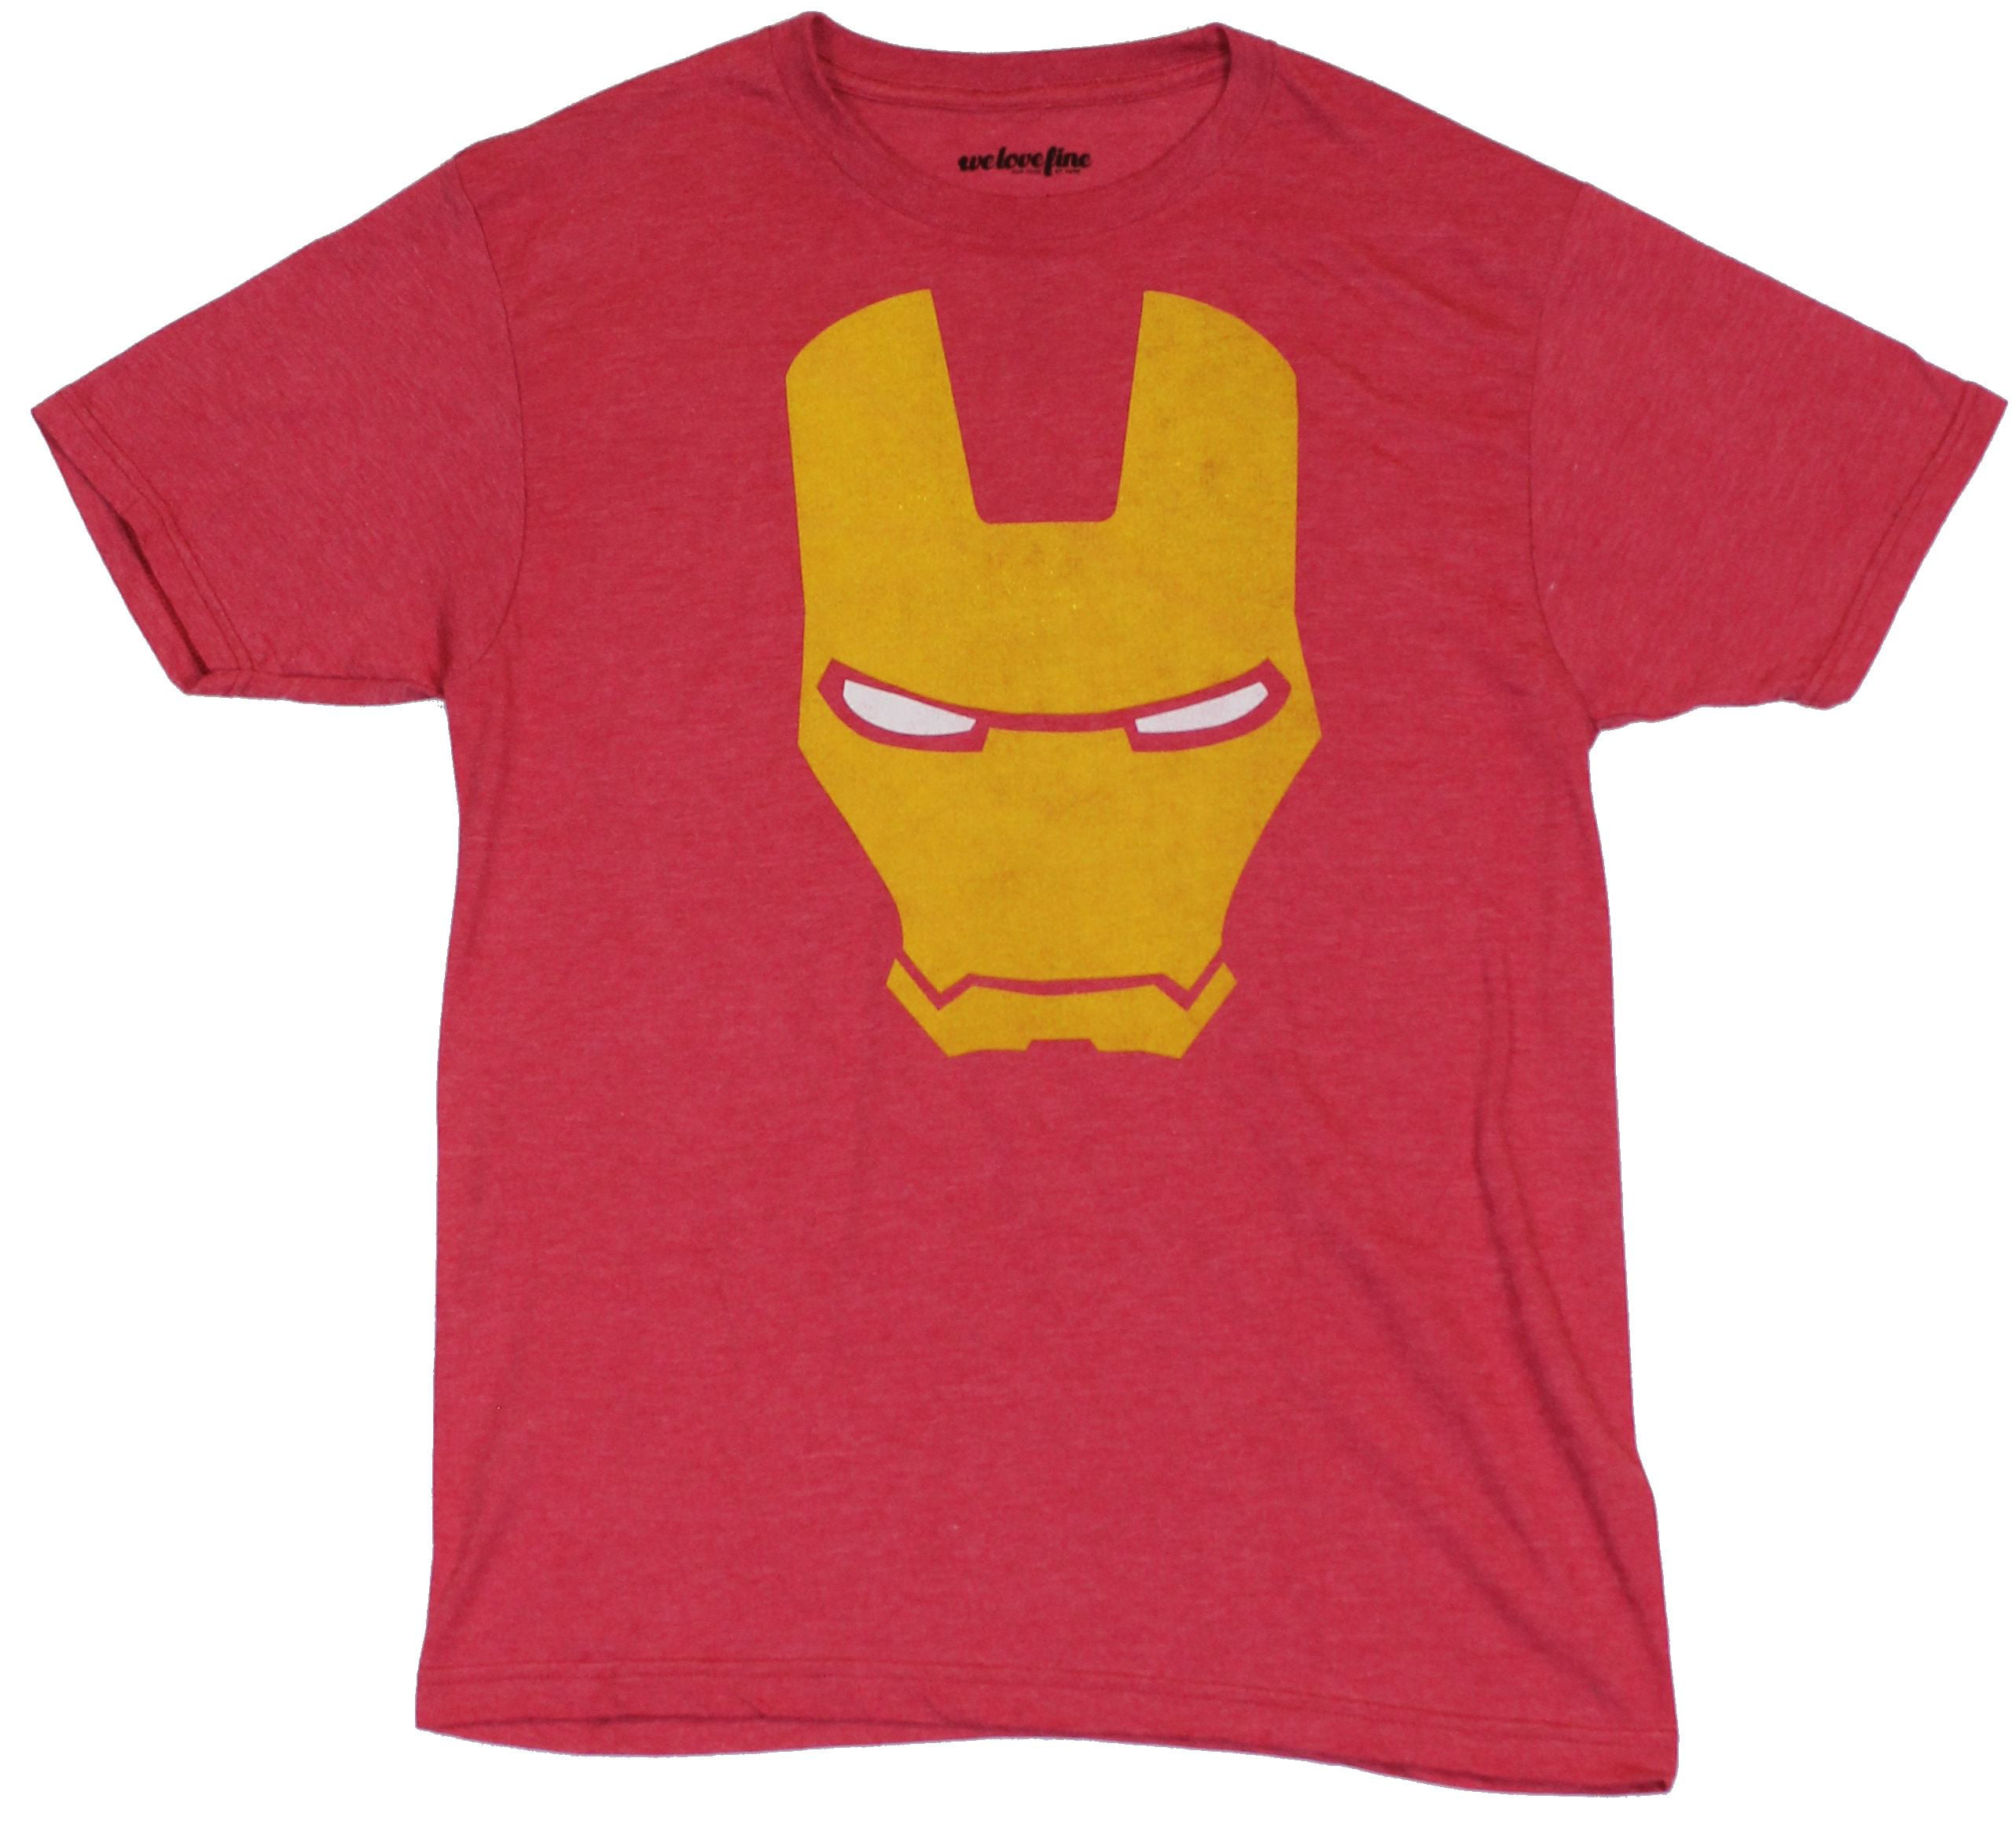 Marvel Iron Man Boys T-Shirt New Yellow Officially Licensed Avengers